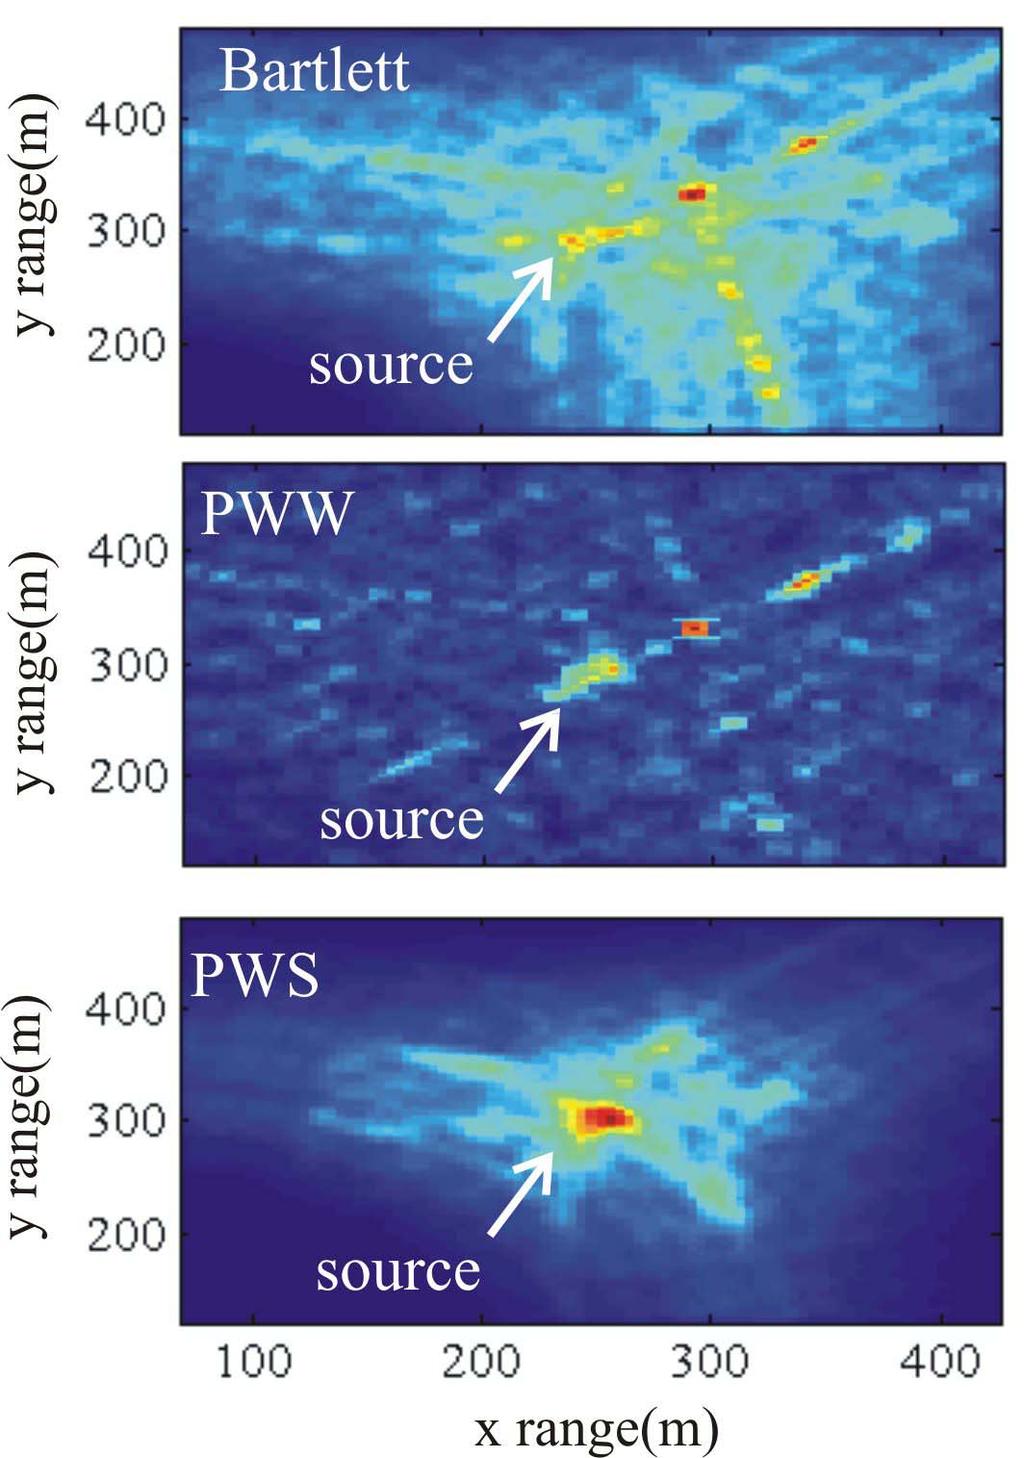 Figure 4. Ambiguity surfaces (probabilistic indicators of source location) created using the Bartlett (top), PWW (middle), and PWS (bottom) processors.